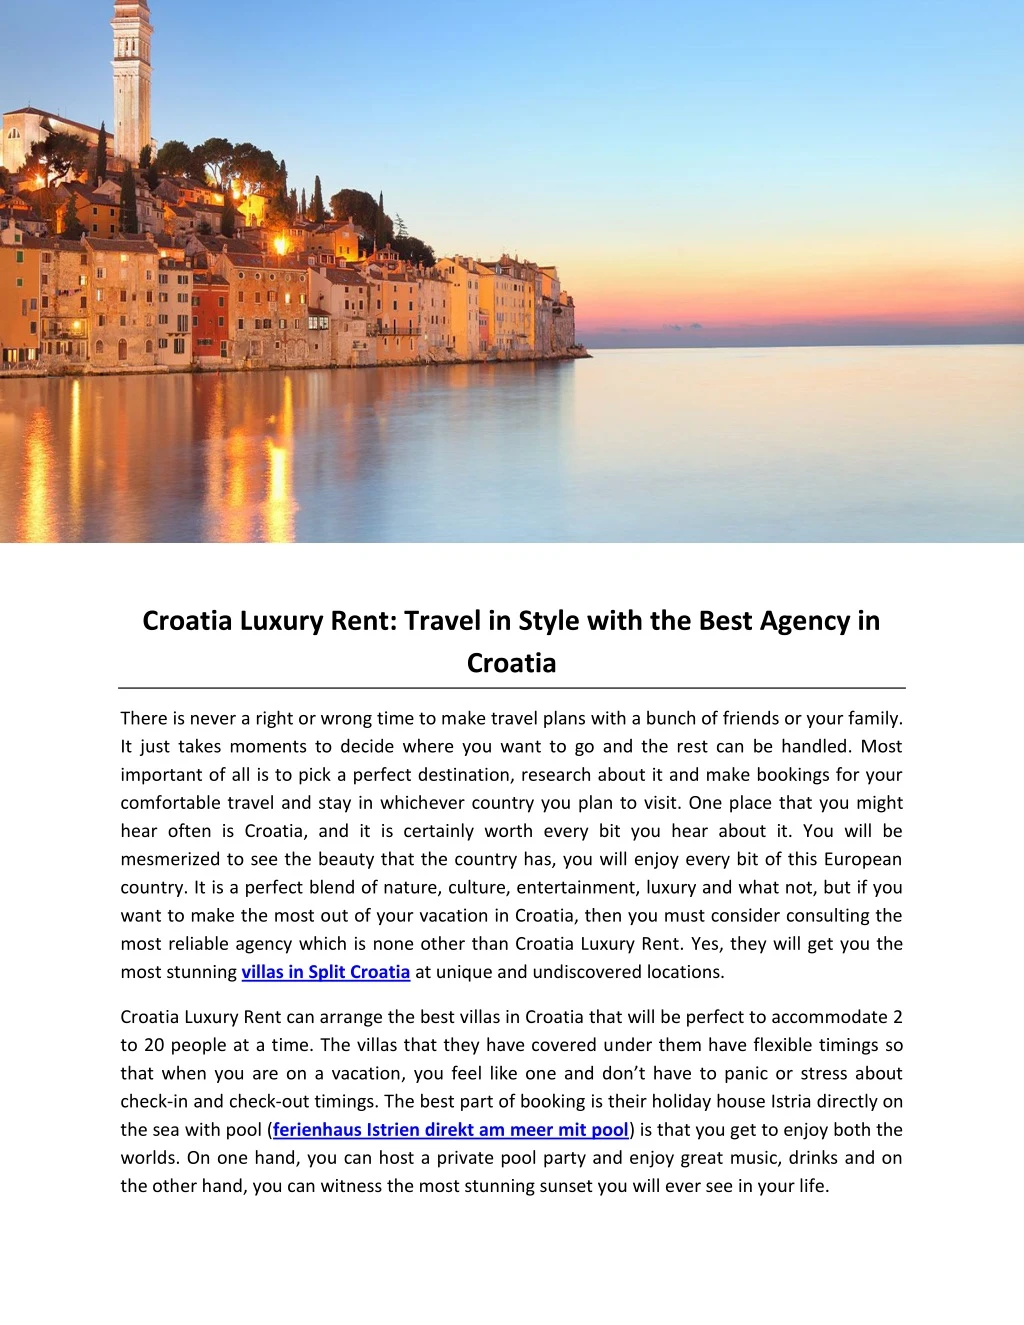 croatia luxury rent travel in style with the best